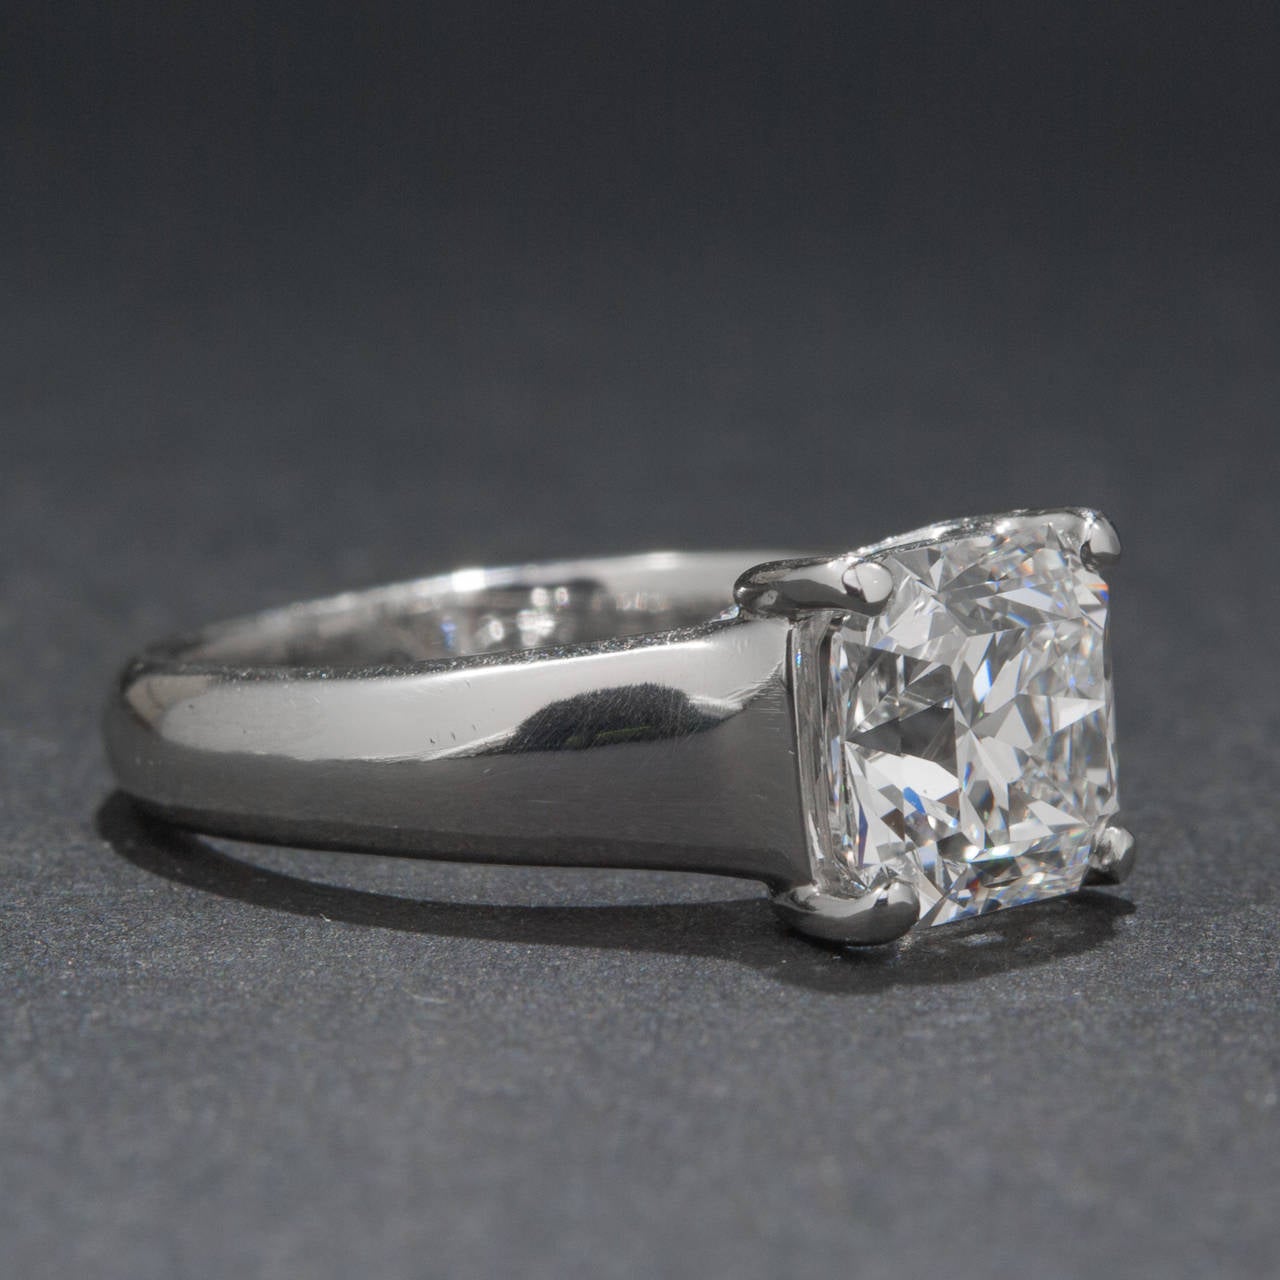 This brilliant 2.08 carat diamond and platinum solitaire ring from Tiffany & Co. is absolutely extraordinary. The diamond is GIA certified 